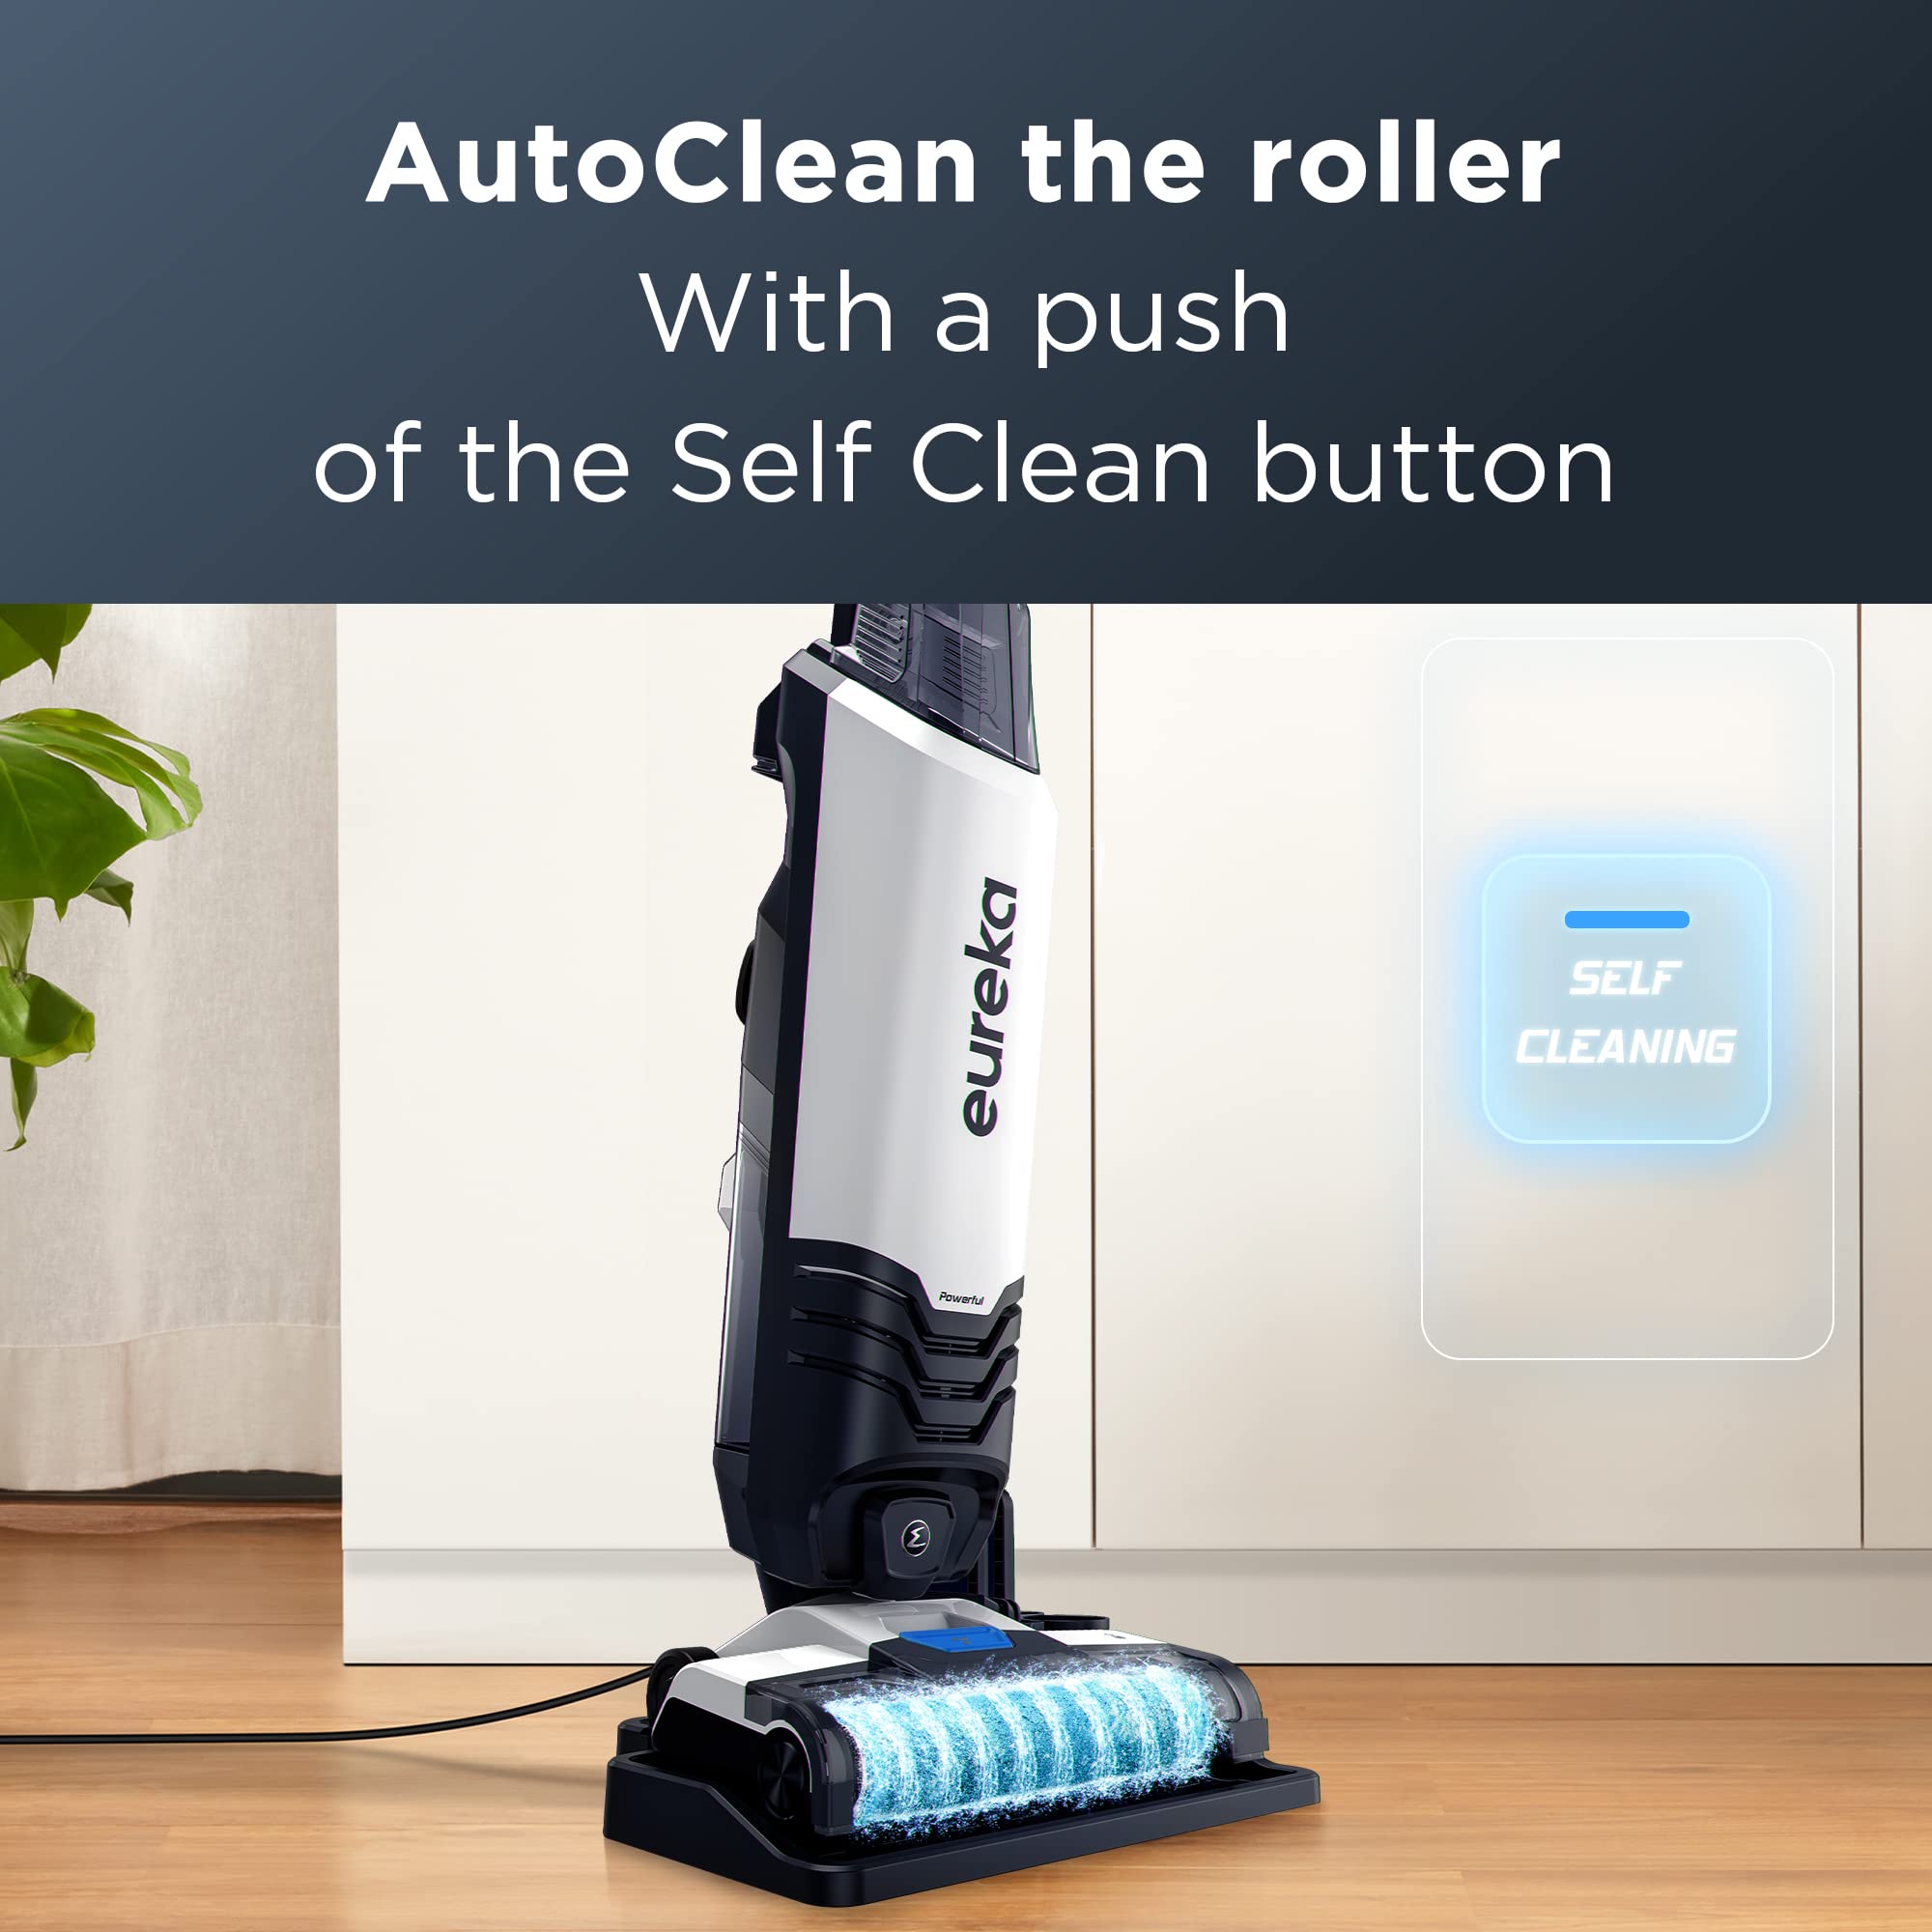 EUREKA All in One Wet Dry Vacuum Cleaner and Mop for Multi-Surface, Corded Lightweight Self-Cleaning System, for Hard Floors and Area Rugs, 2-in-1, Black and White